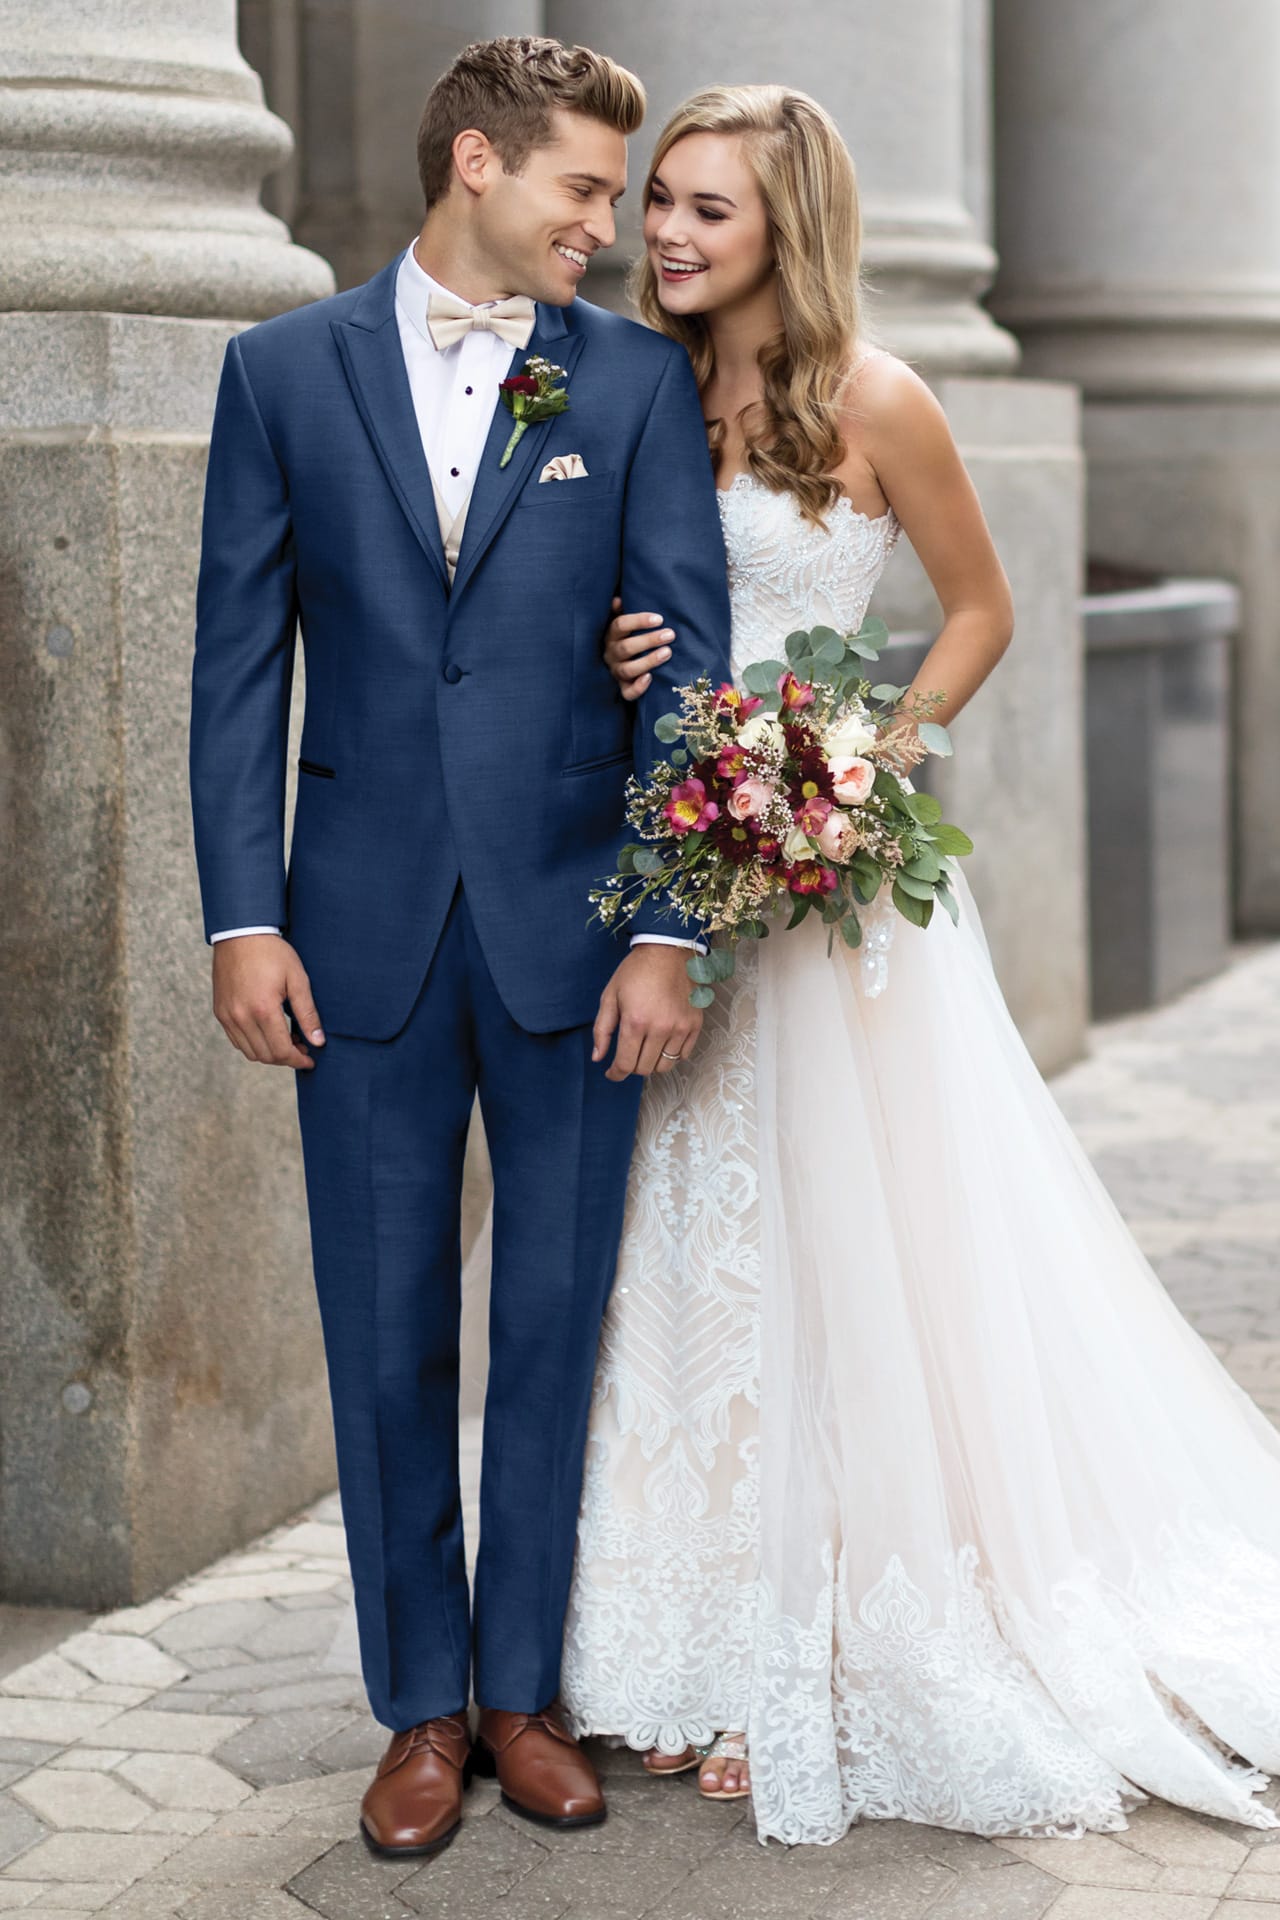 Blue Tuxedos and Wedding Attire for Groom